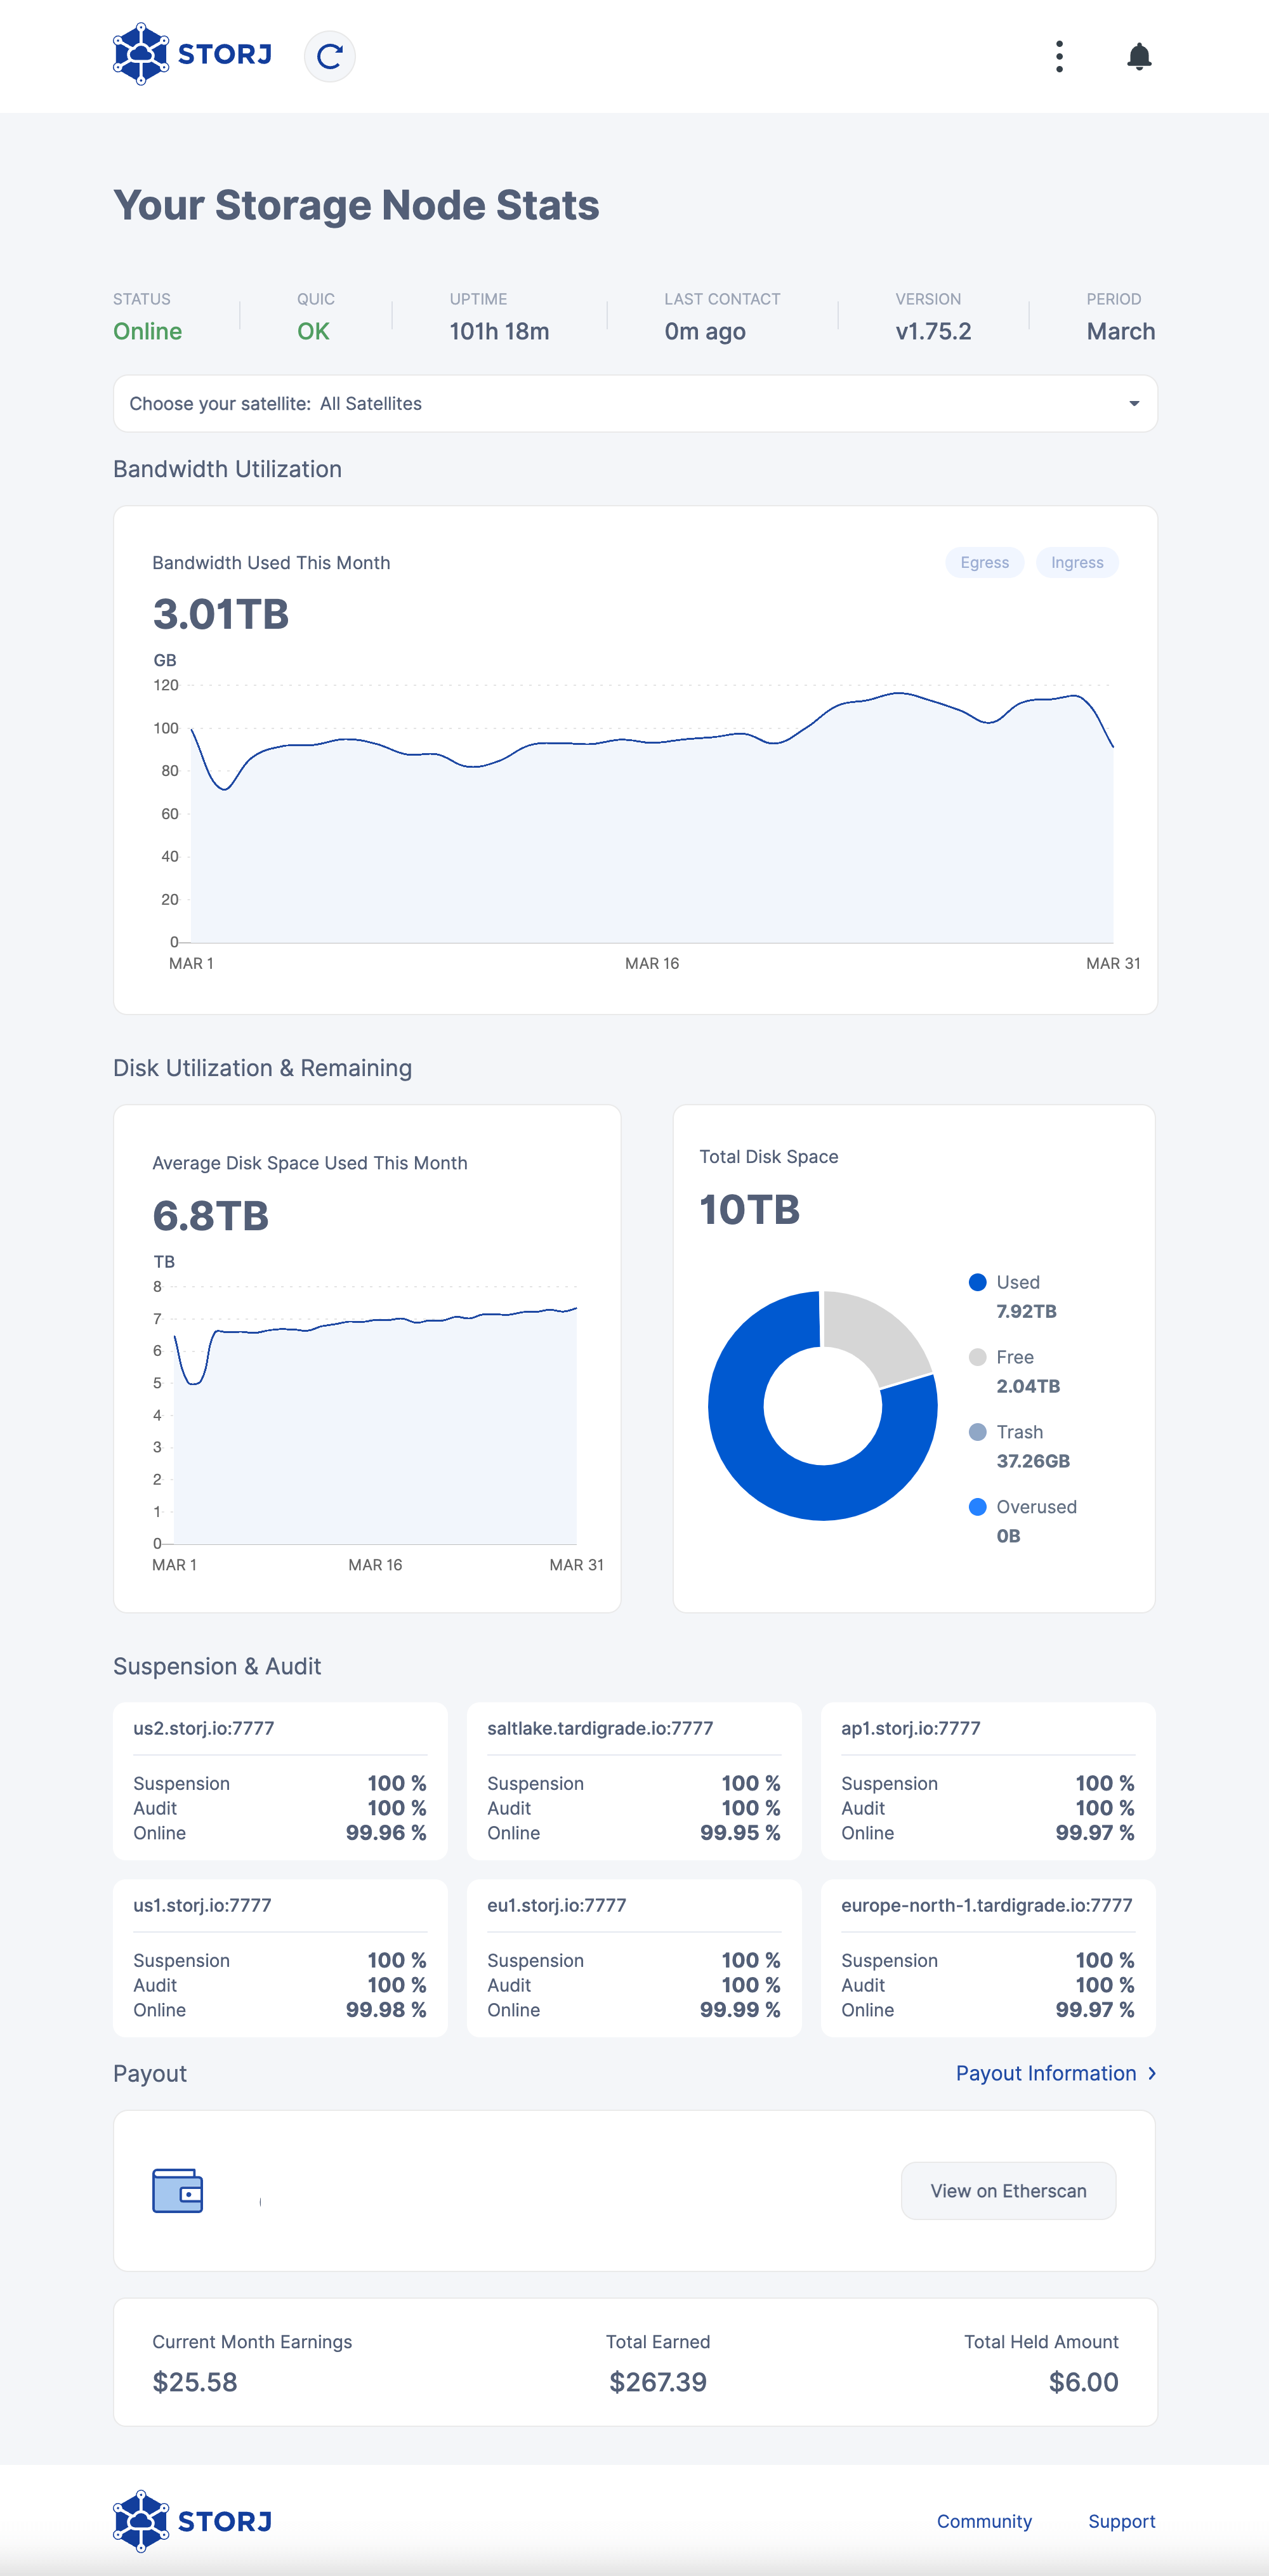 Storj Dashboard end of March 2023. Bandwidth used: 3.01 TB. Average storage space used per day: 6.8 TB. Total available storage: 10 TB. Used storage: 7.92 TB. Free disk space: 2.04 TB. Recycle bin: 37.26 GB. Earnings this month: $25.58. Total earnings: $267.39. Withheld earnings: $6.